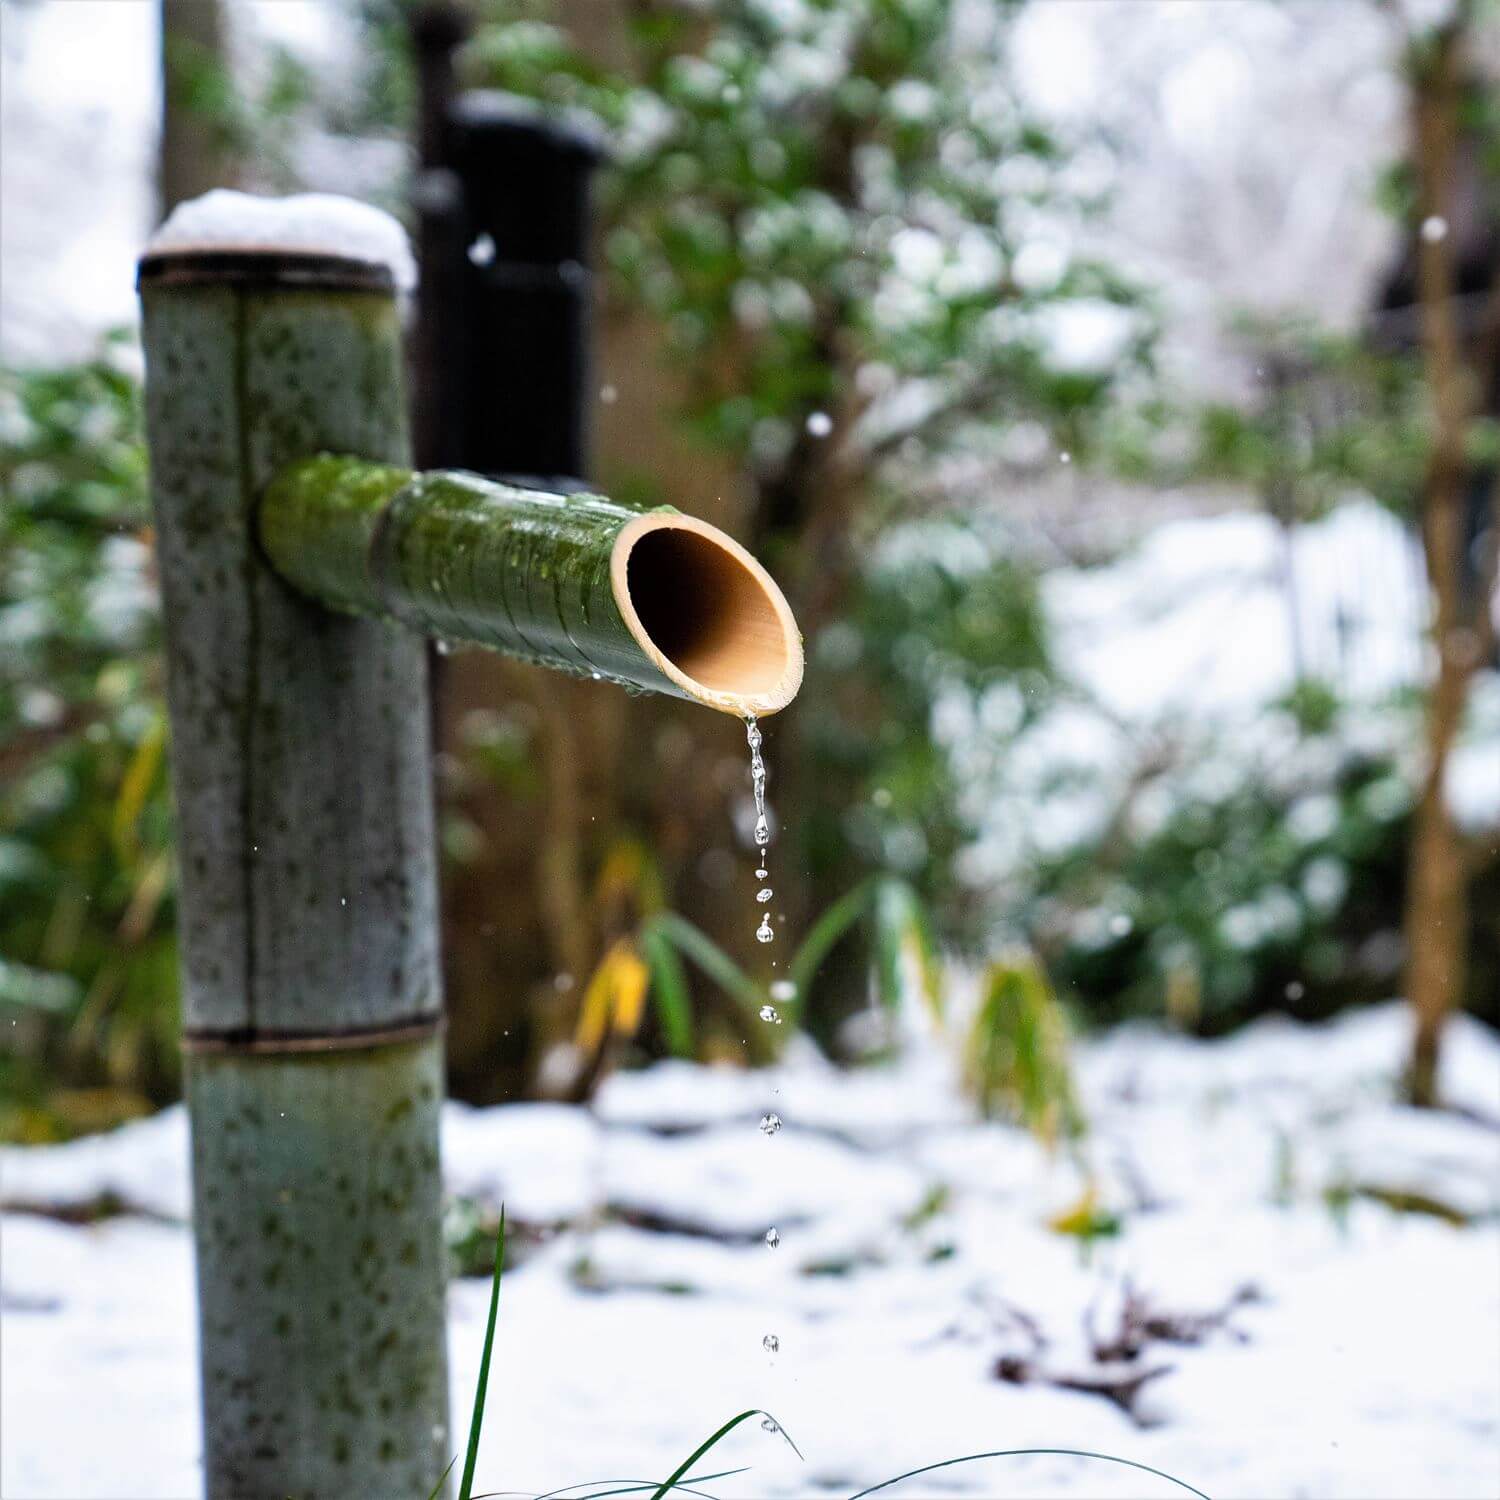 In the northern part of Kyoto, it sometimes snows in the winter =Shutterstock 8